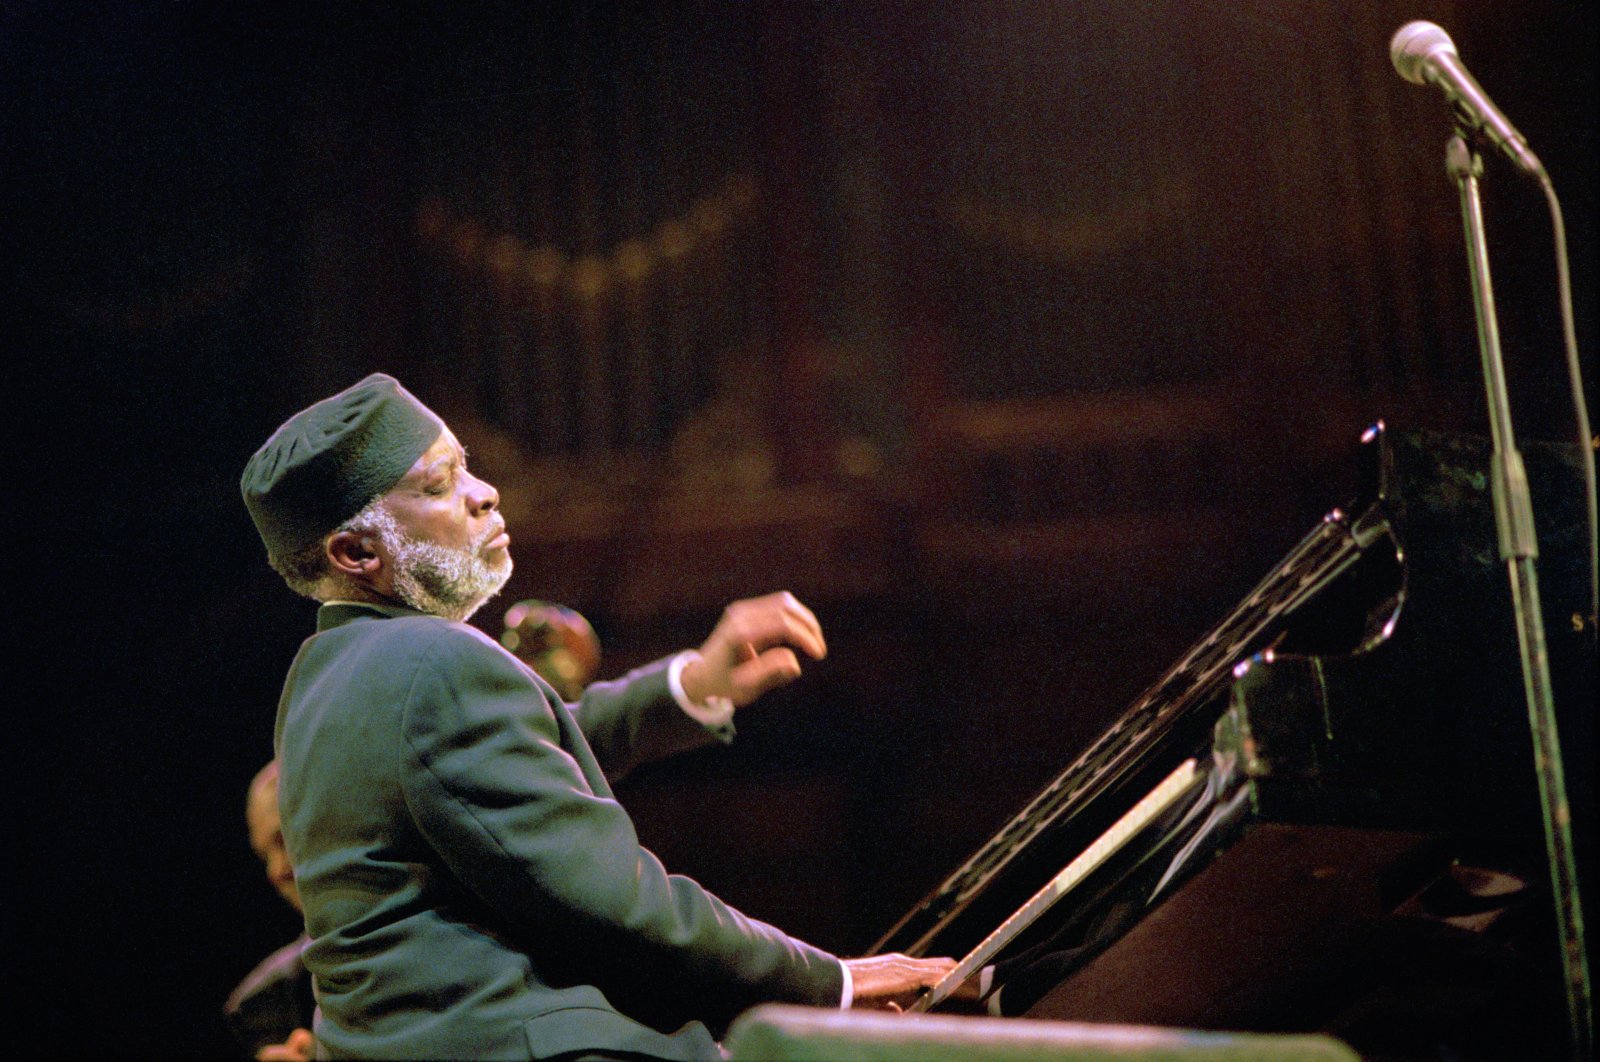 Pianist Ahmad Jamal performs at the Concertgebouw, Amsterdam, Netherlands. Oct. 25, 2000. (Getty Images Photo)